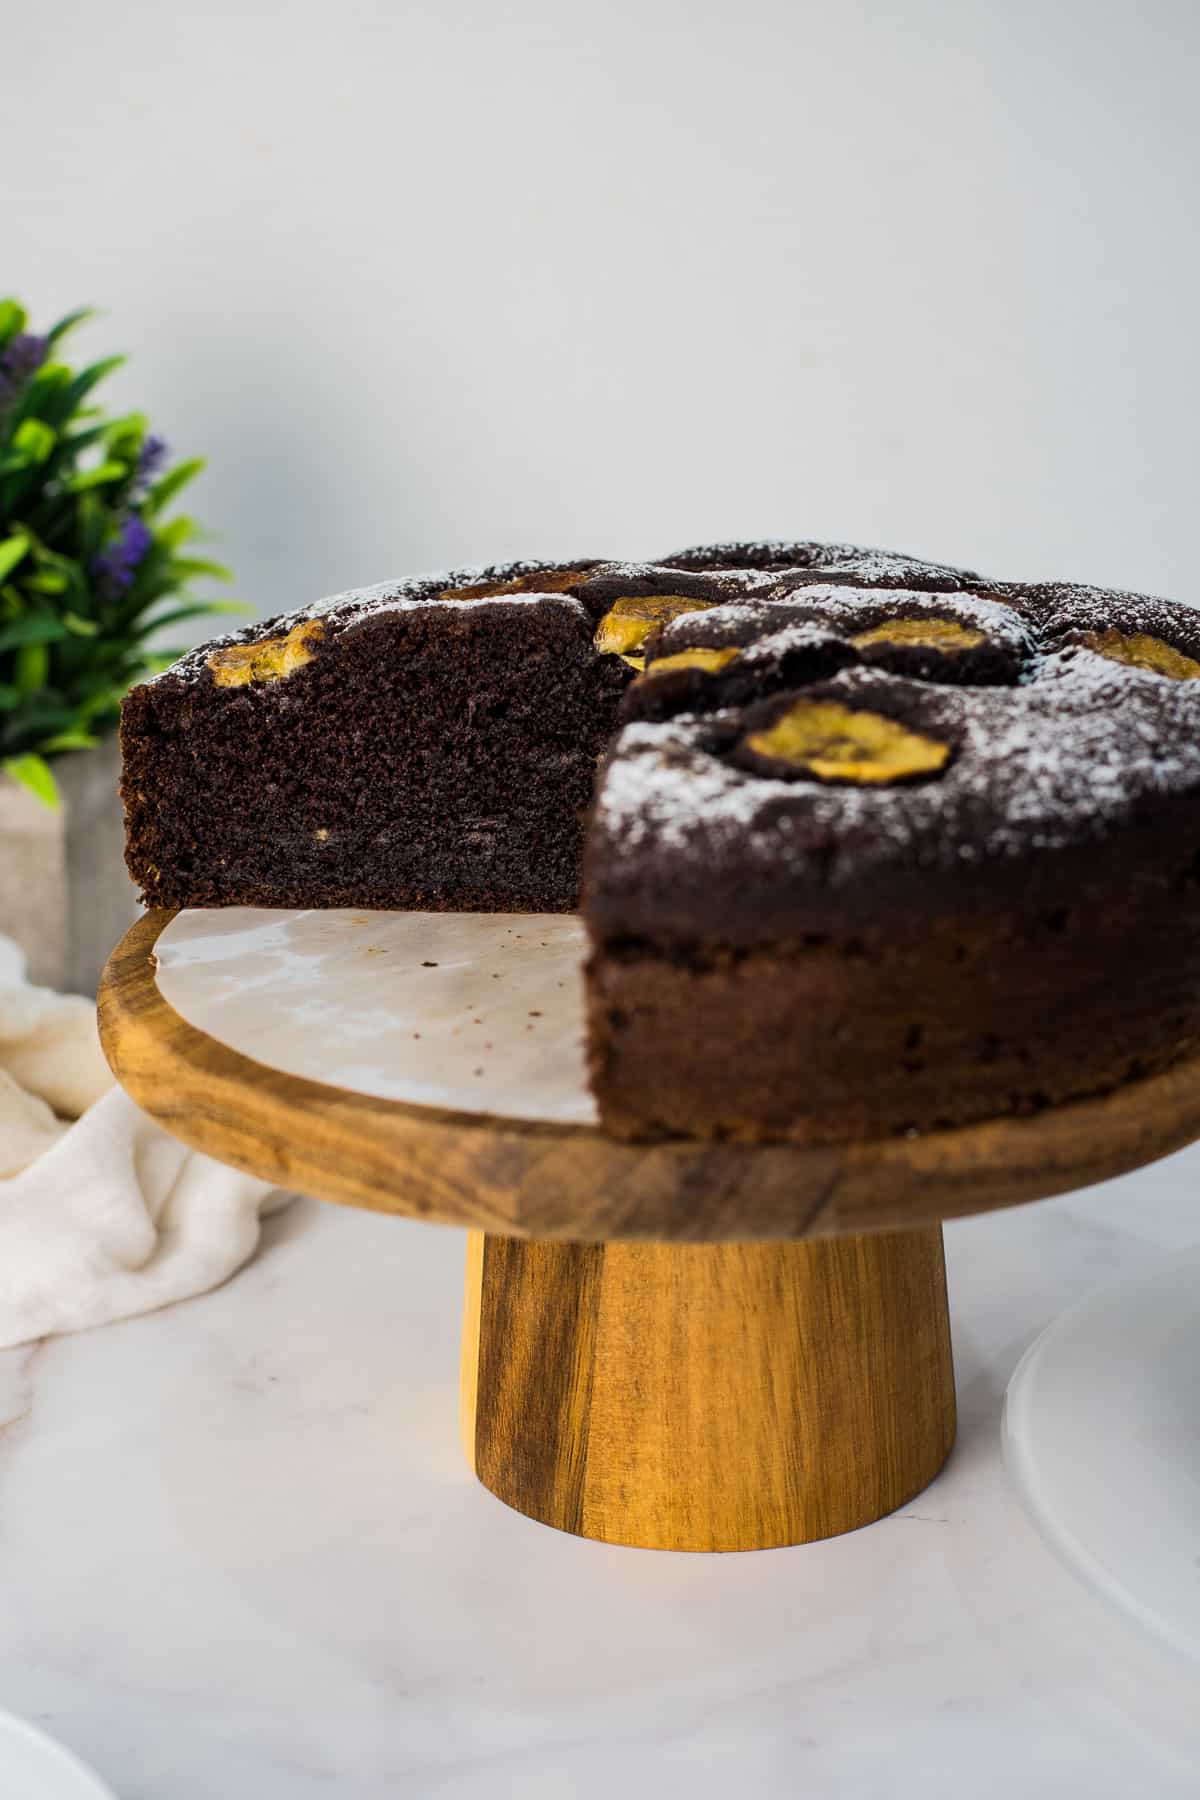 A chocolate cake with banana slices on top, on a wooden cake stand.